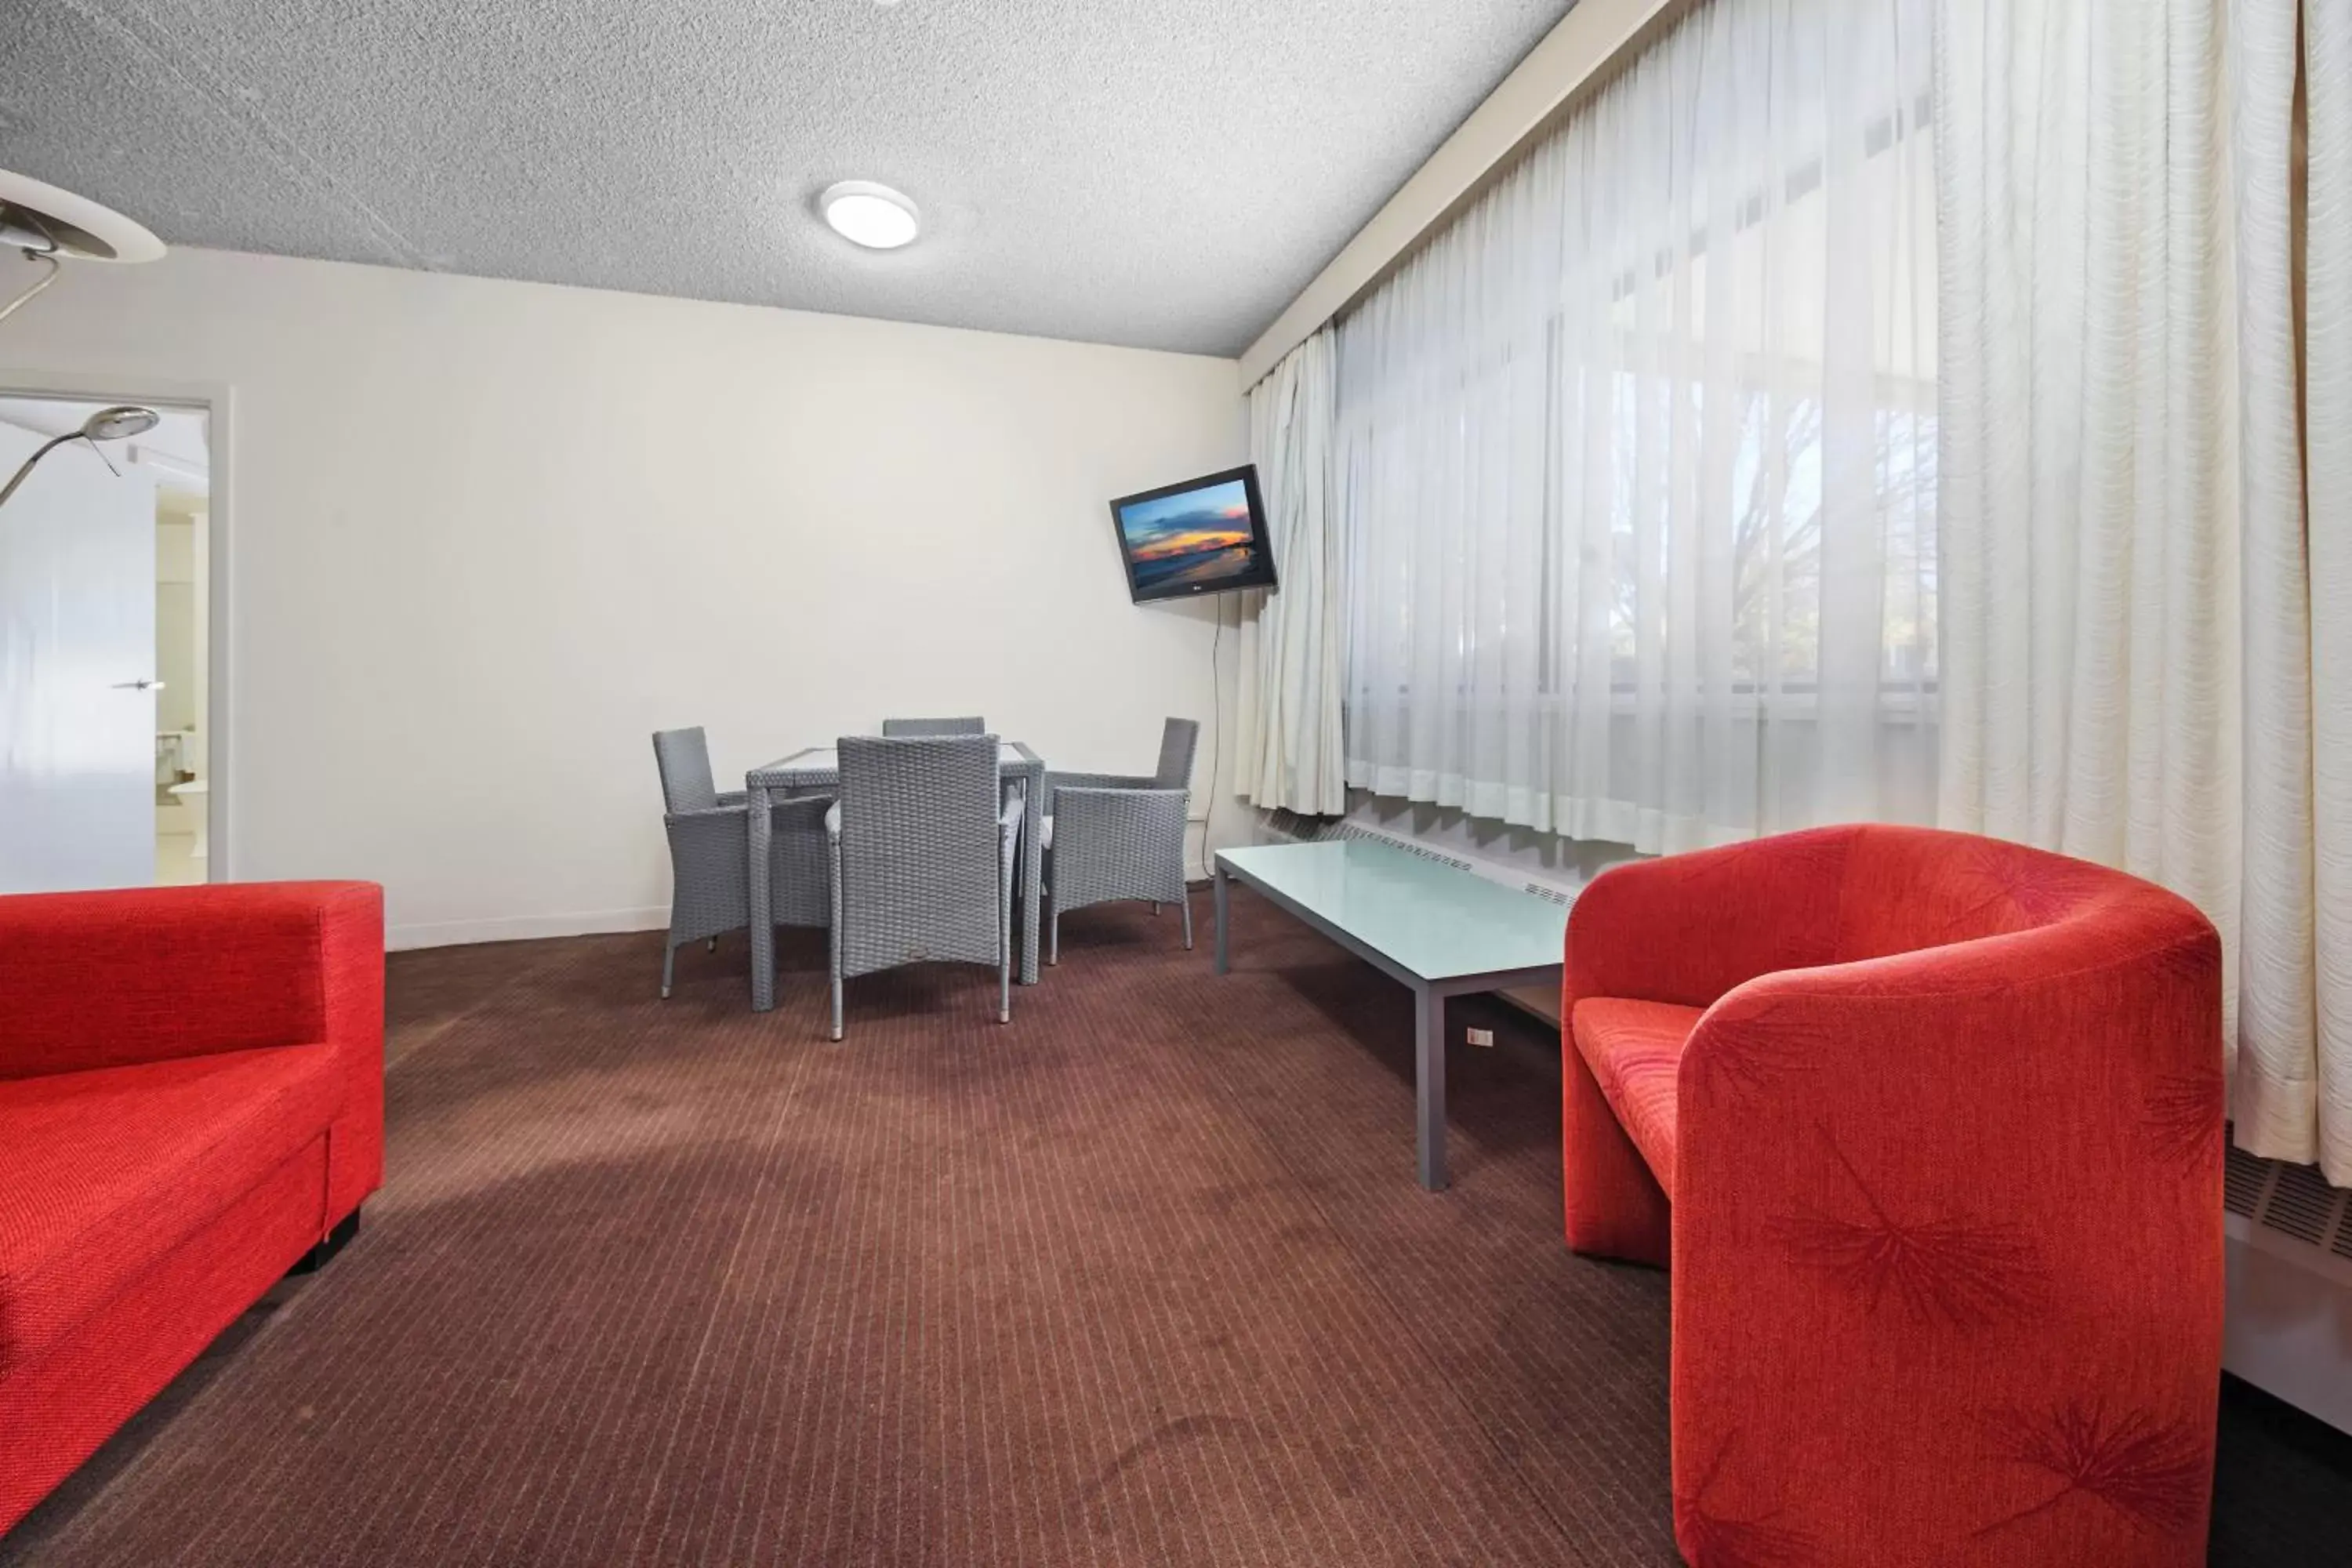 Seating Area in Belconnen Way Hotel & Serviced Apartments